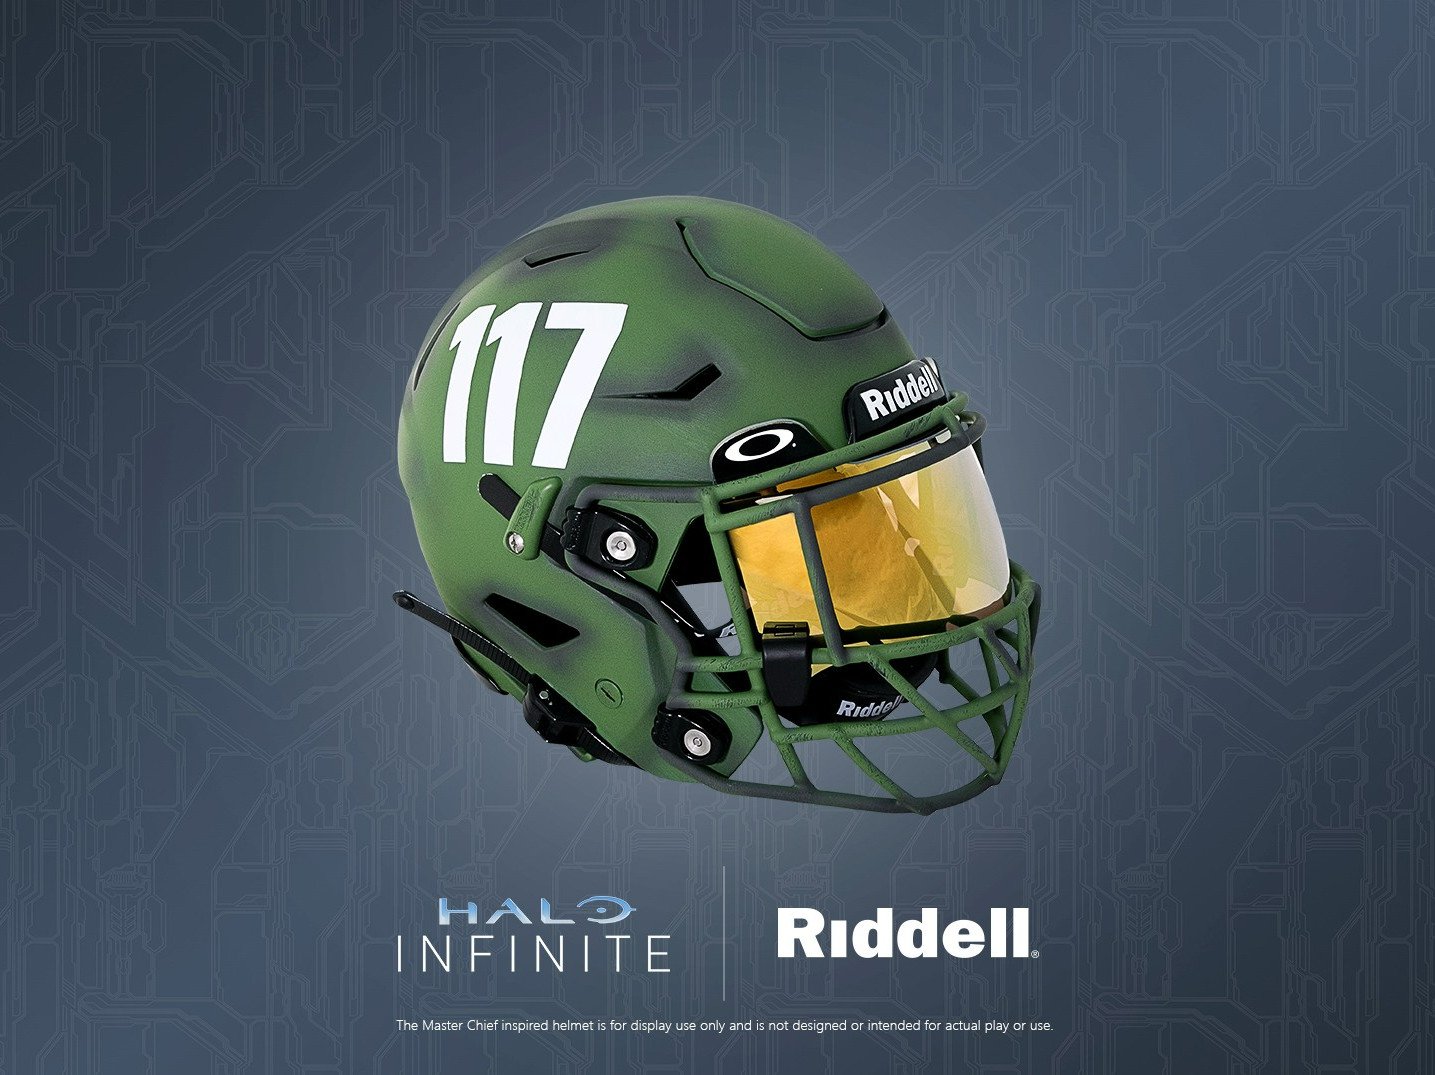 You could win this Master Chief Halo helmet from Riddell